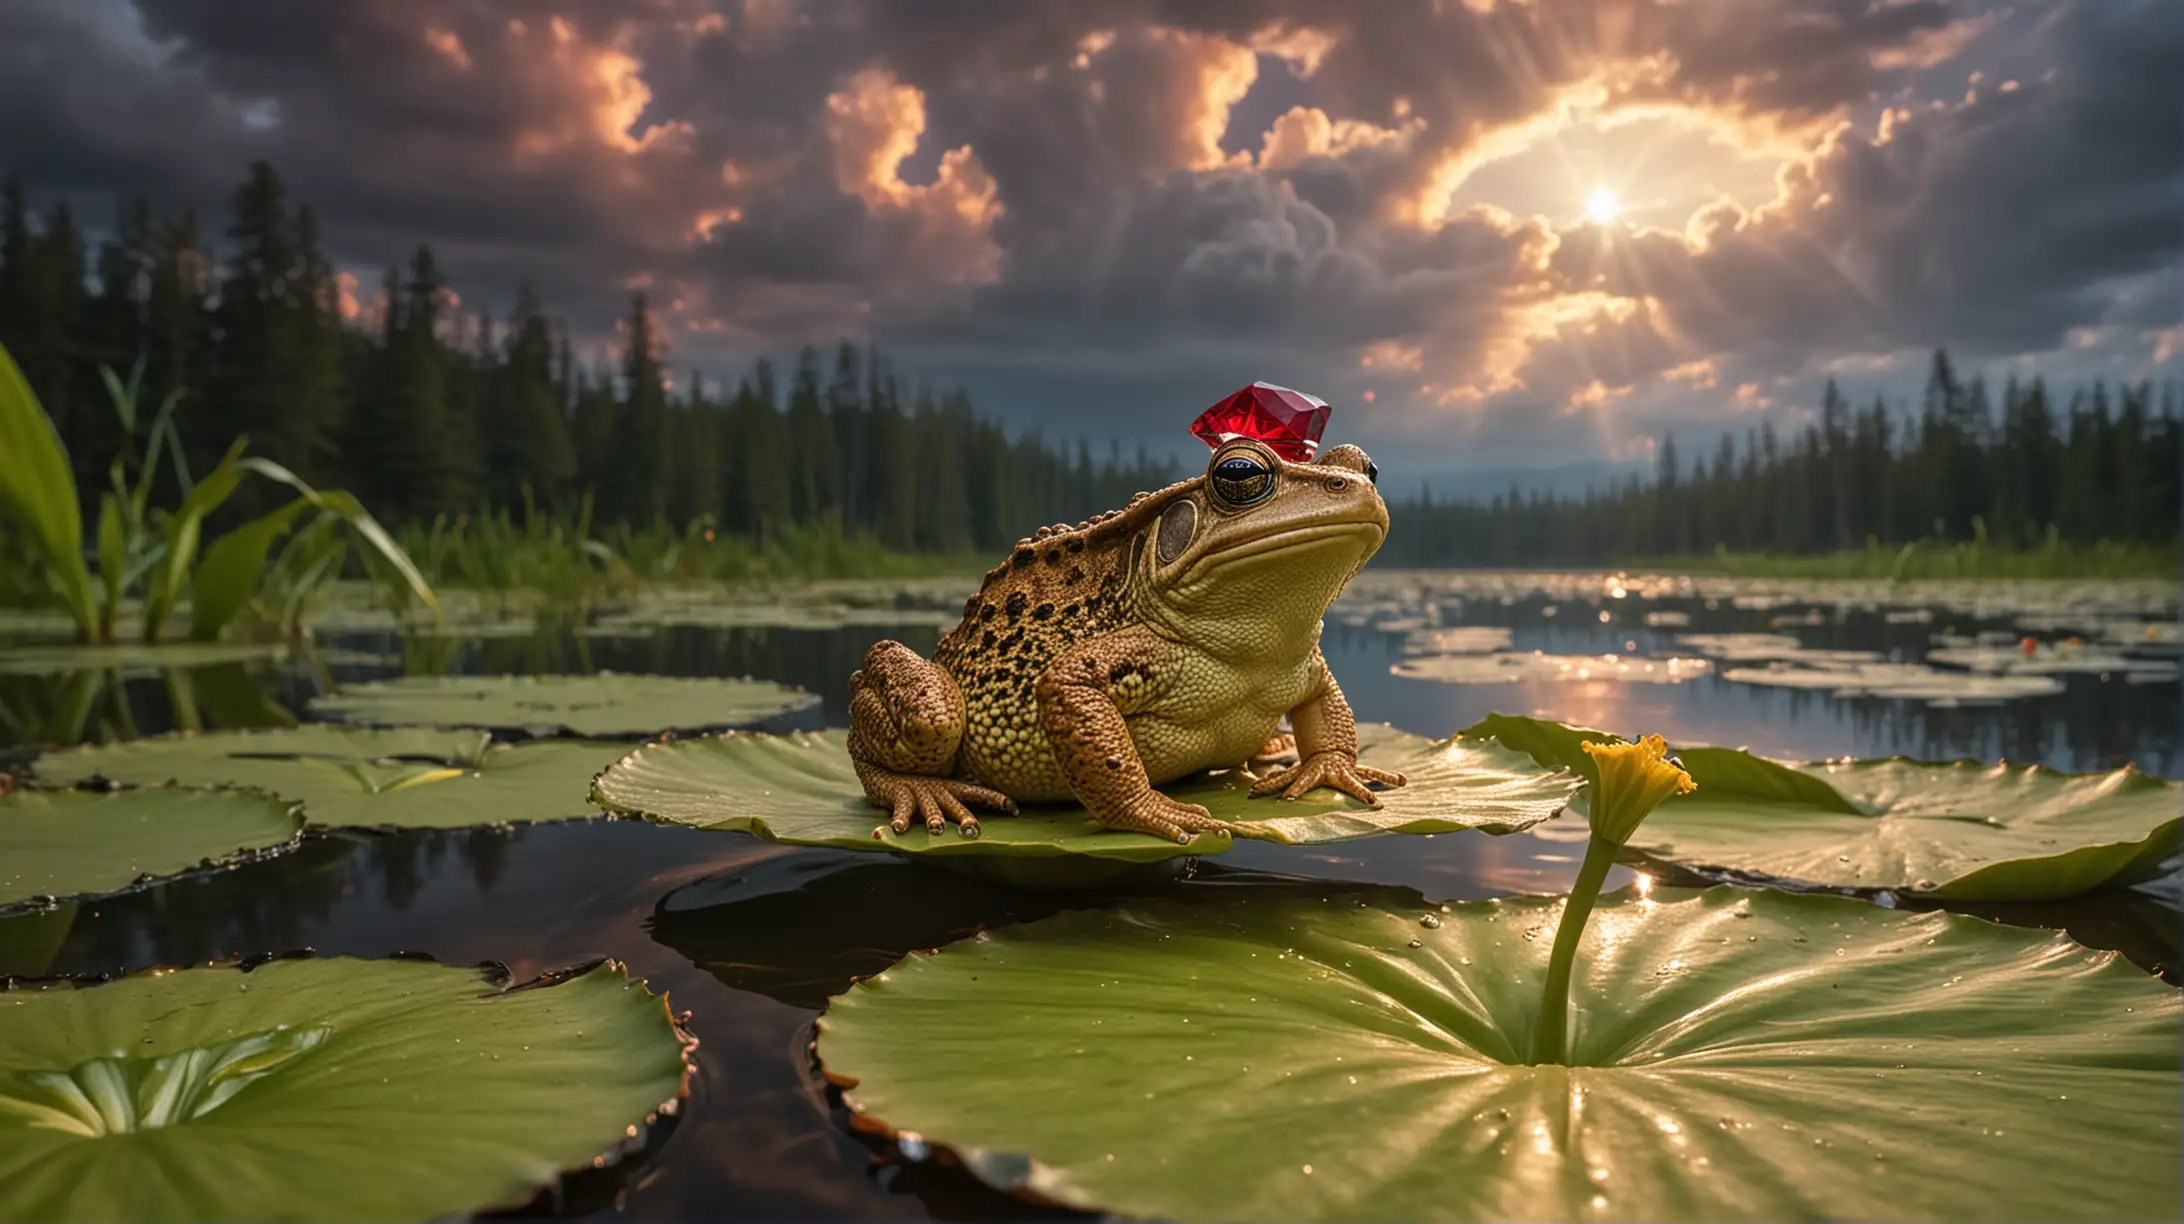 A magic toad, sitting on a lily pad, a sparkling ruby jewel on its head, nearby forest, dramatic clouds, warm light.